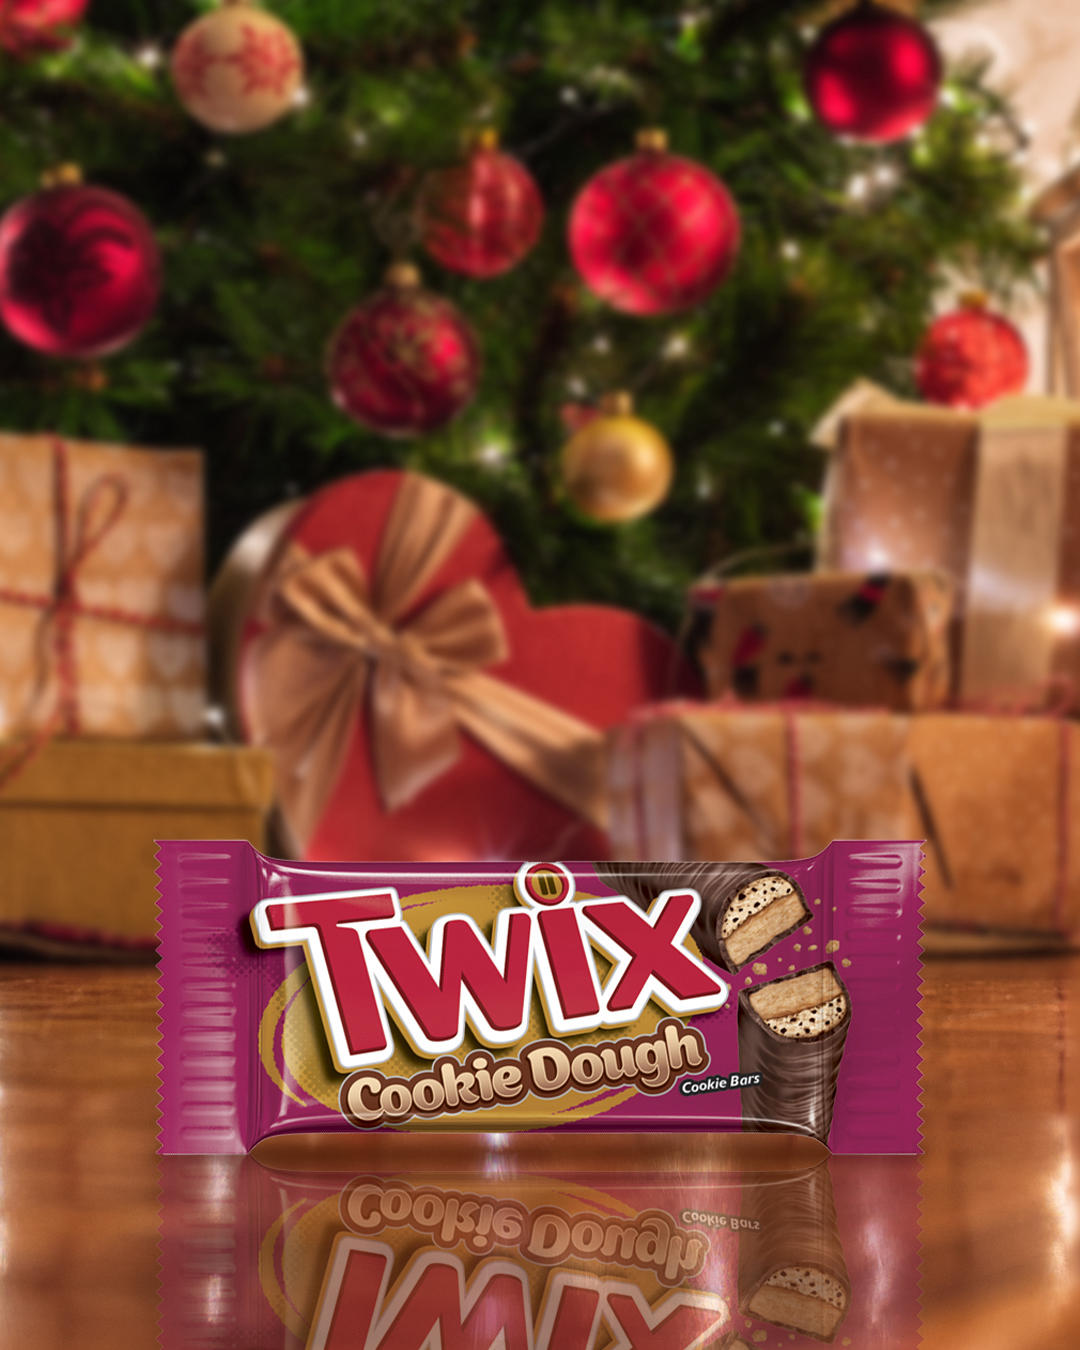 TWIX - Santa came early and brought TWIX Cookie Dough to stores near you